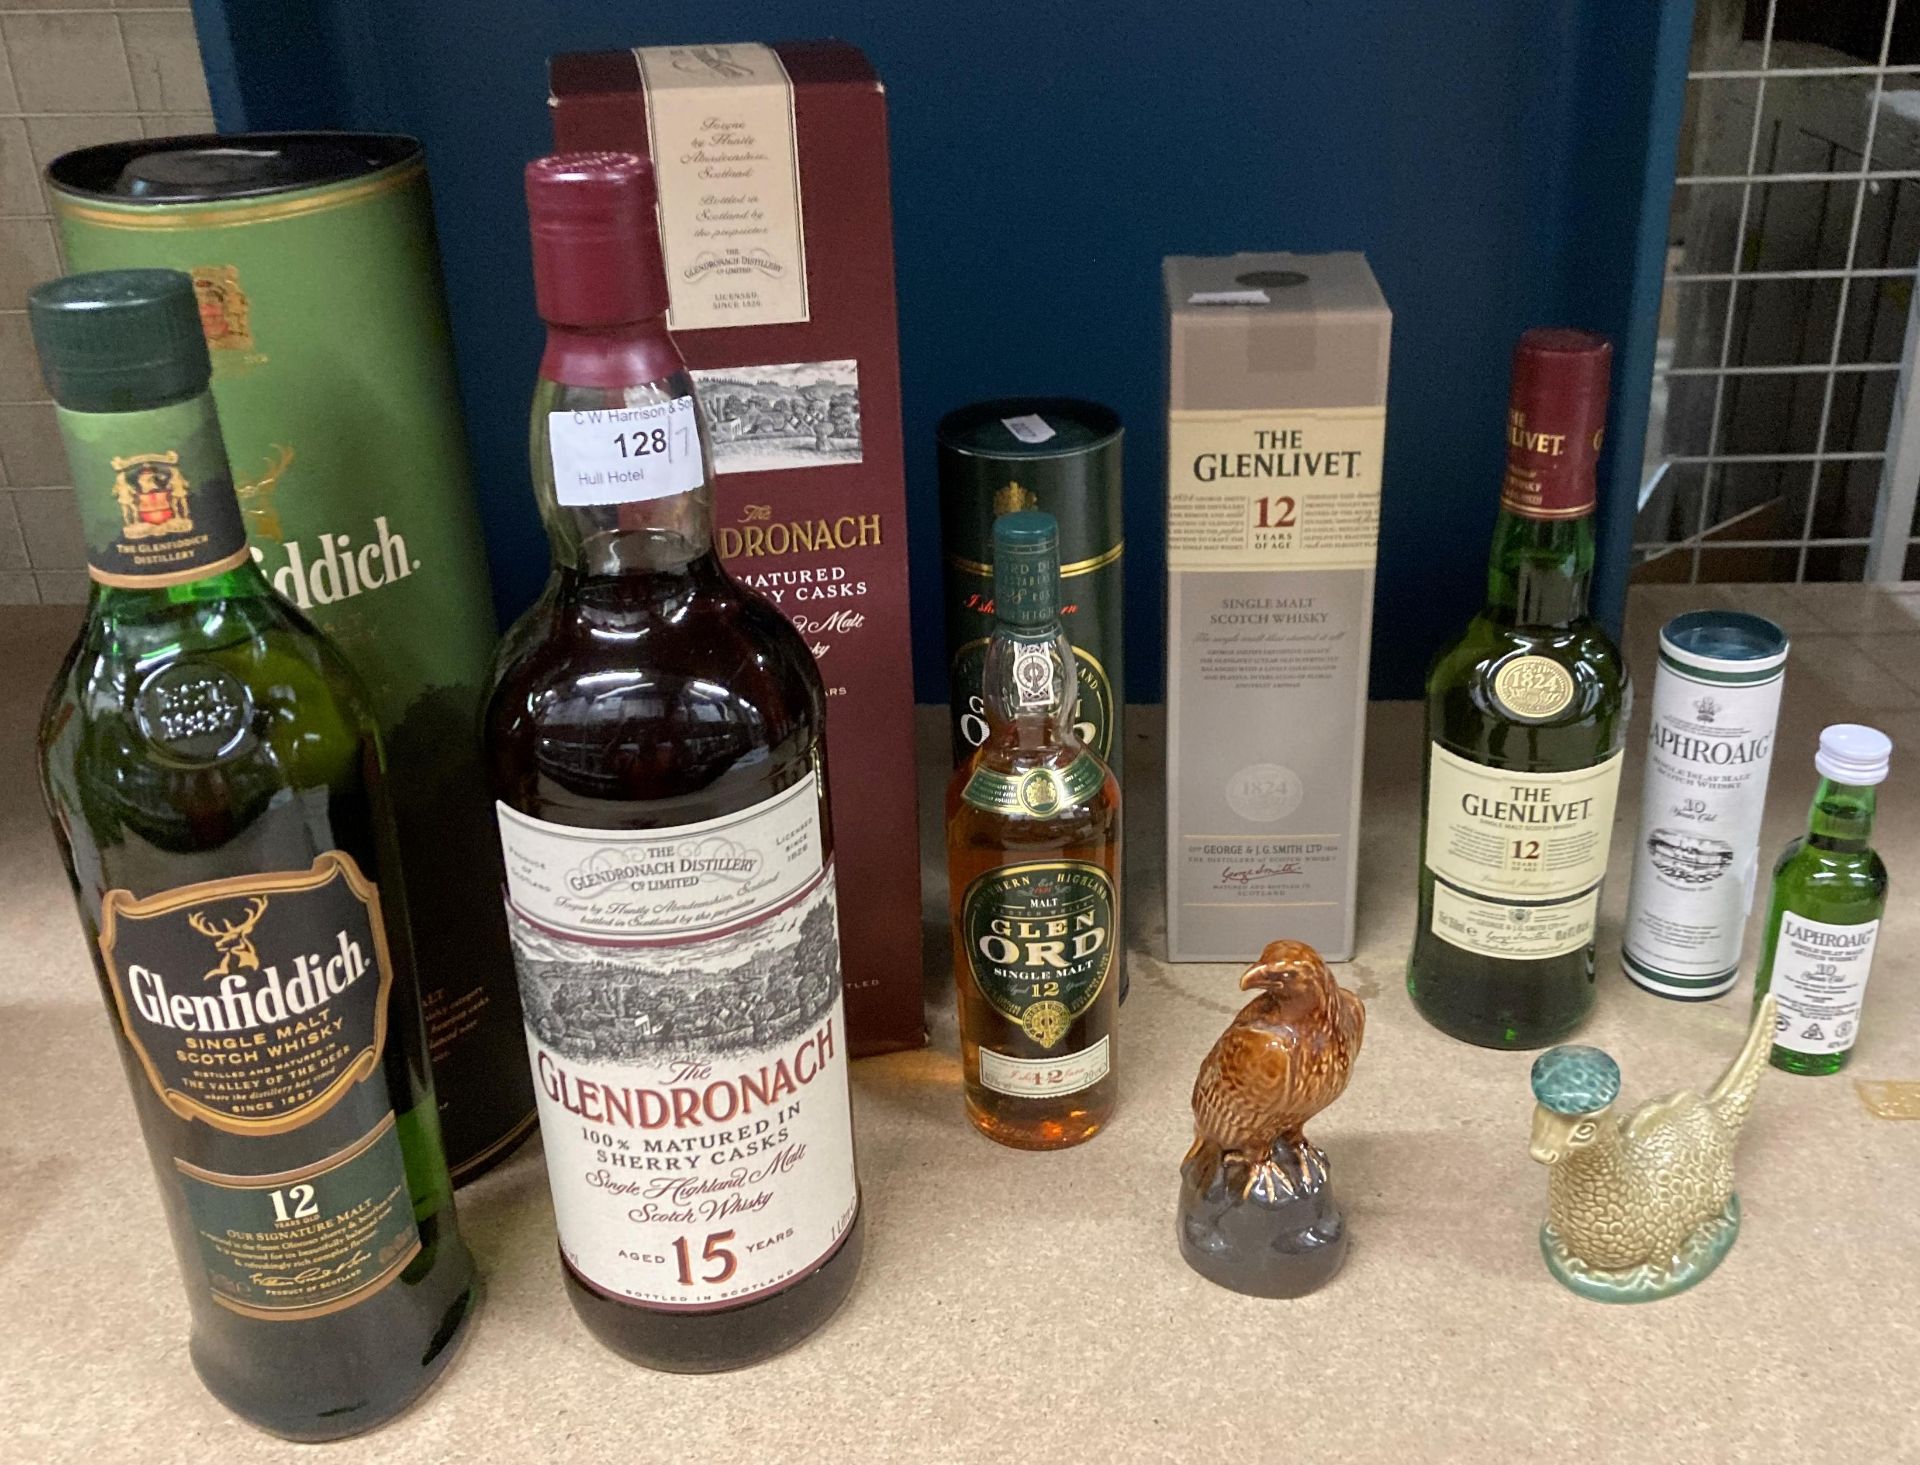 A small whisky collection comprising a 70cl bottle of Glenfiddich 12 years old Single Malt Scotch